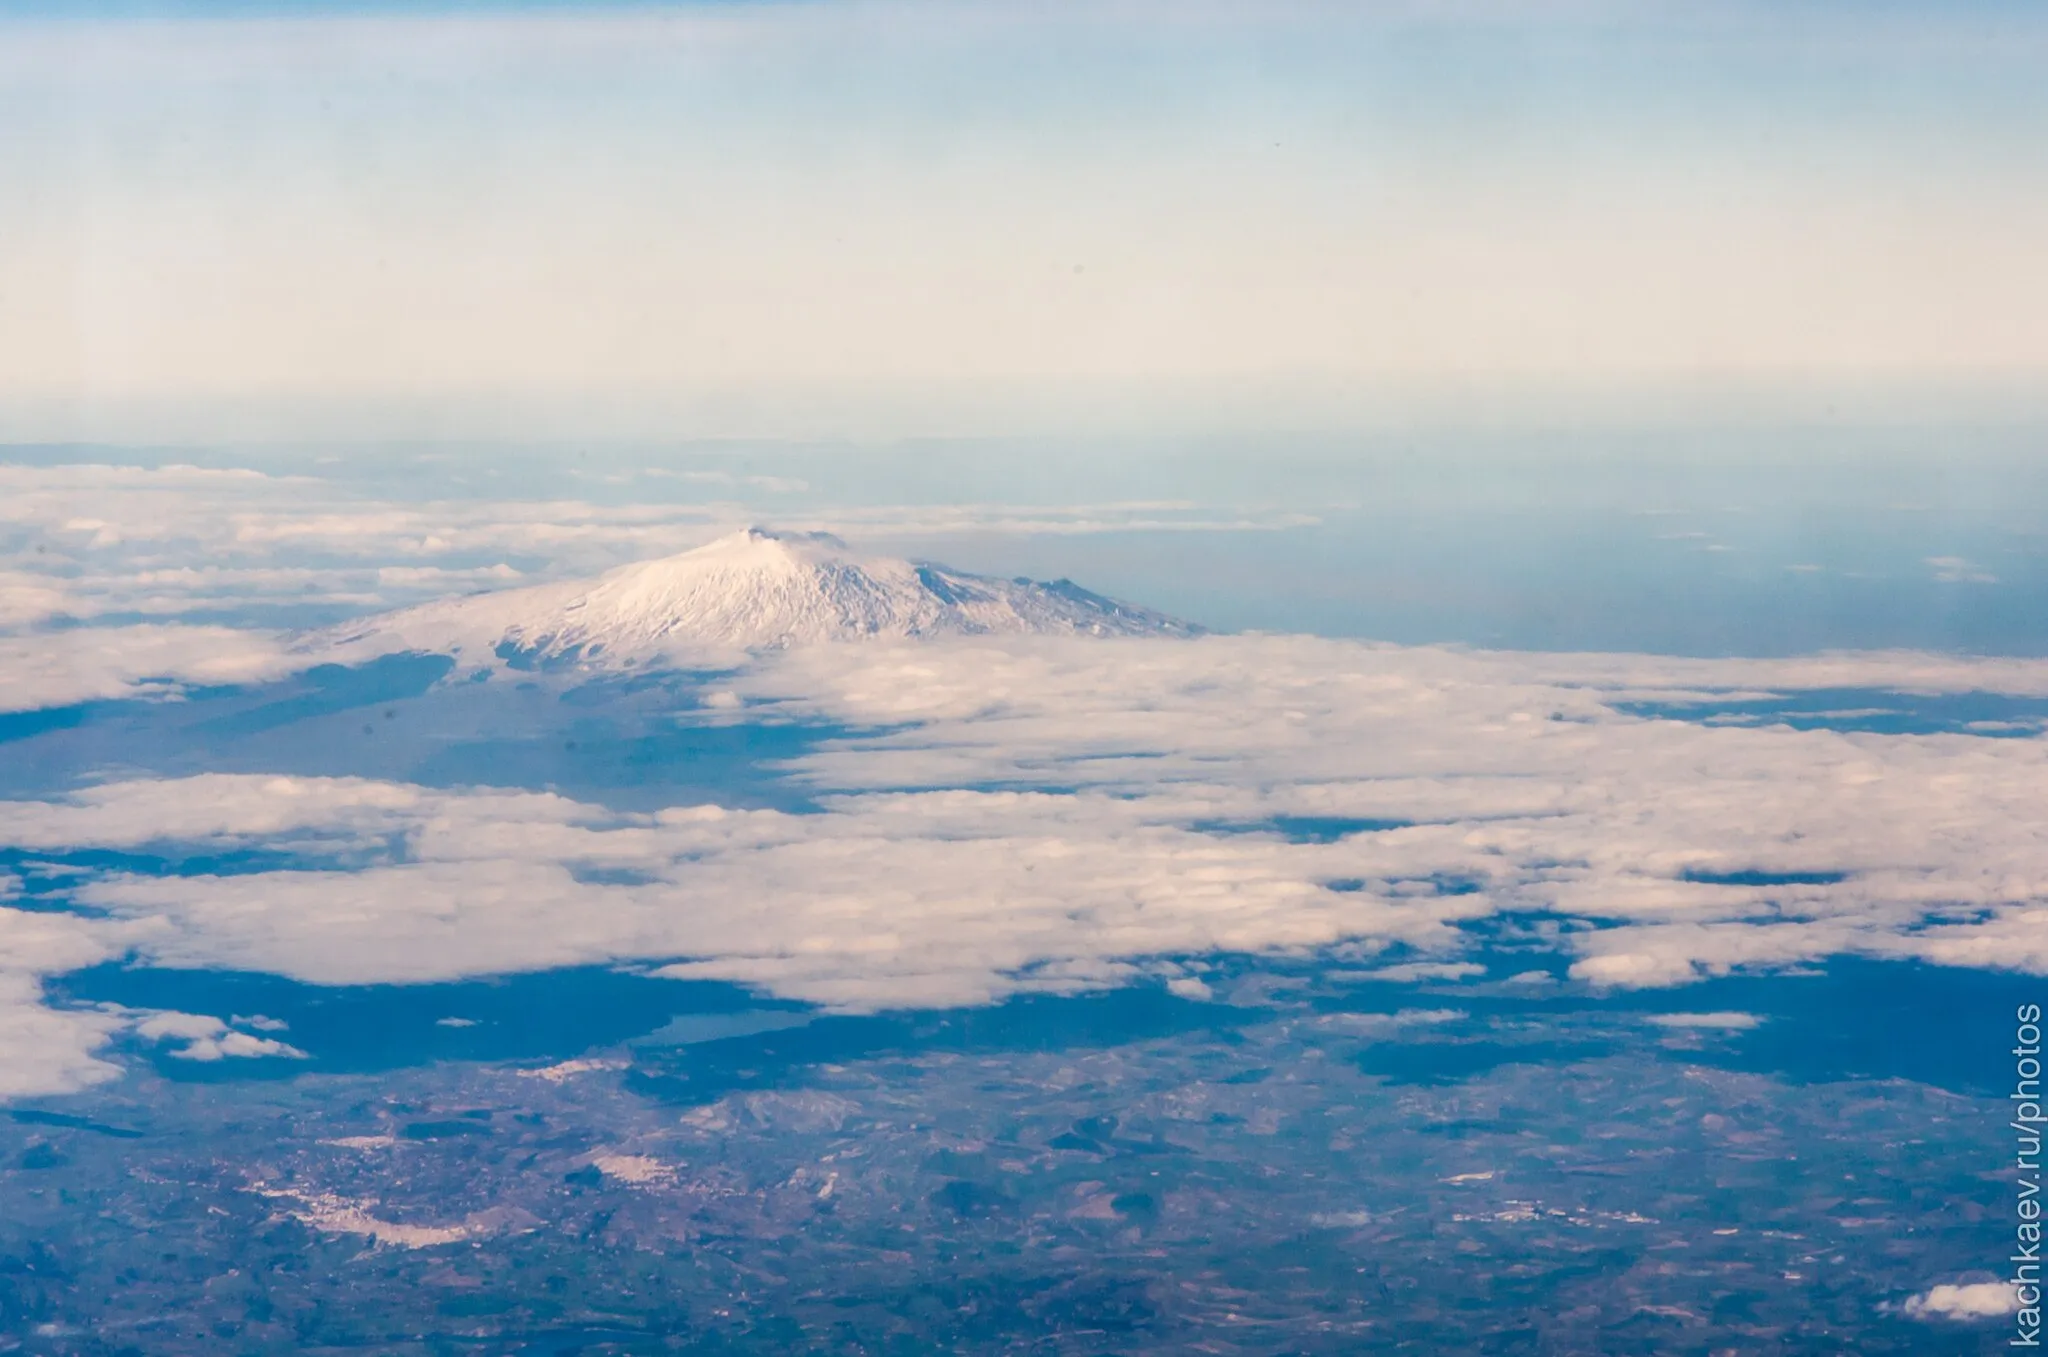 Photo showing: Aerial view of Mount Etna (2016)